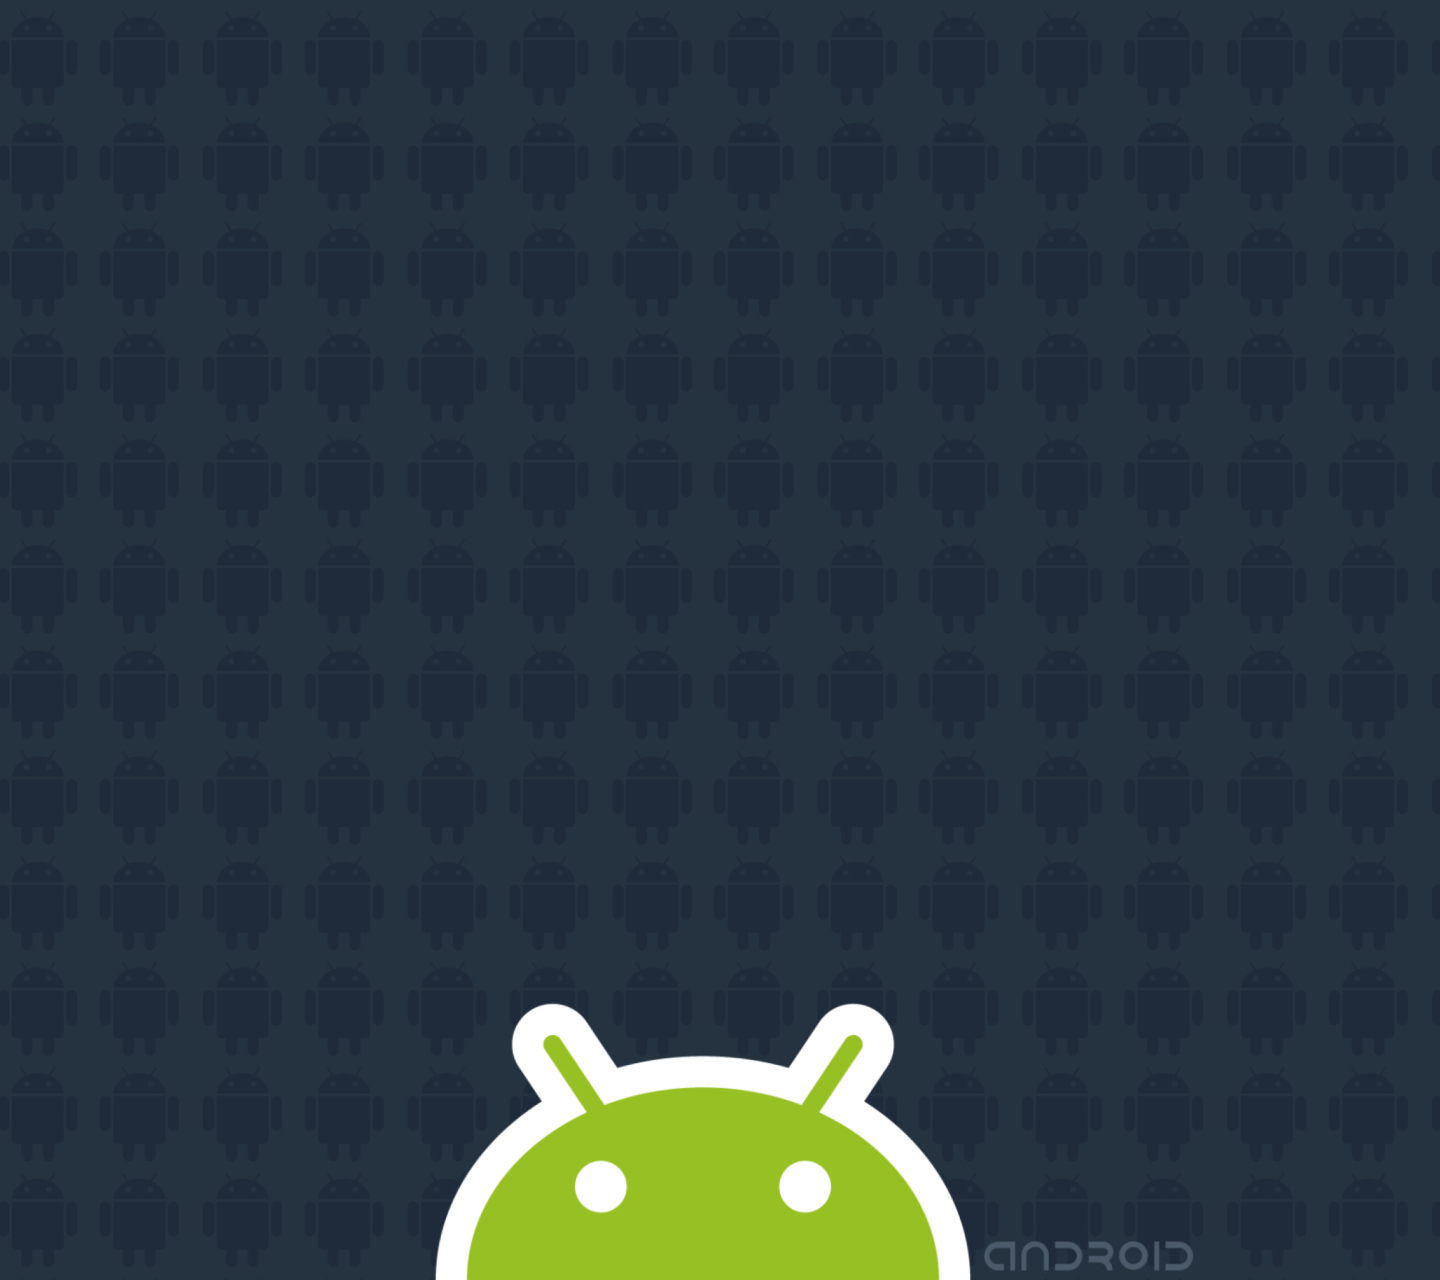 Android 2.2 wallpaper 1440x1280